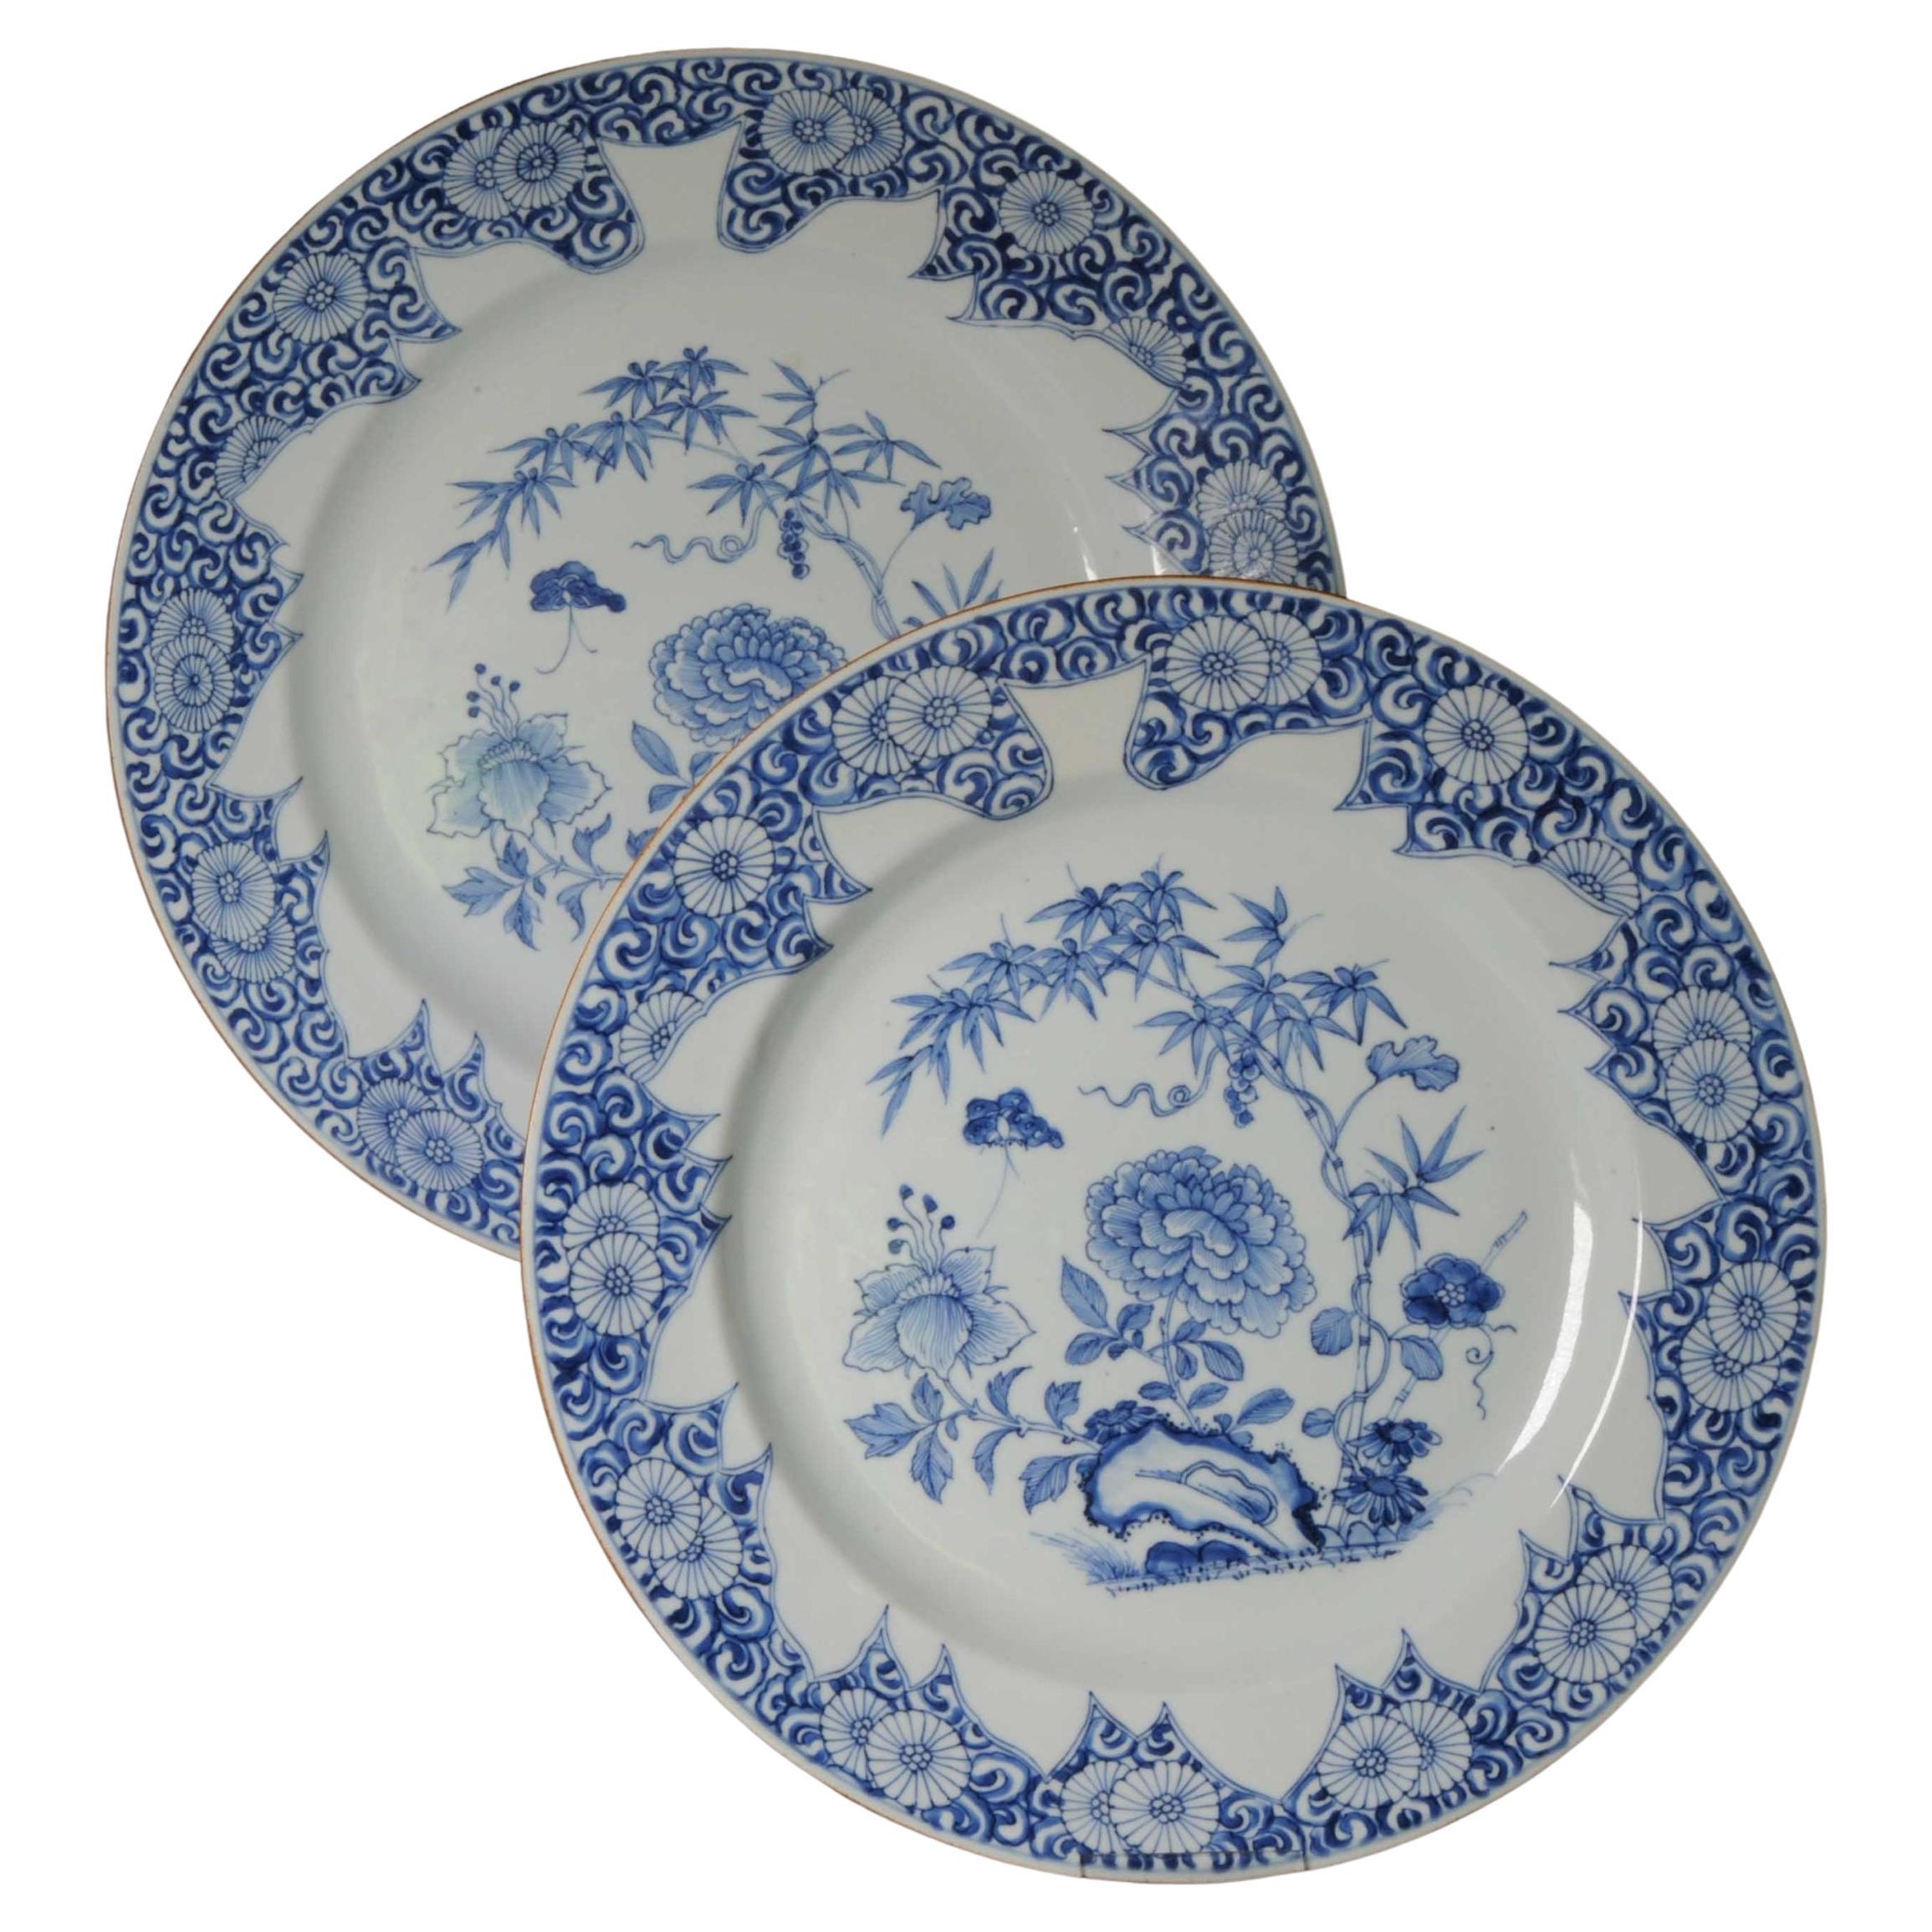 Pair Chinese export porcelain Blue White Large dishes with Leafs deco